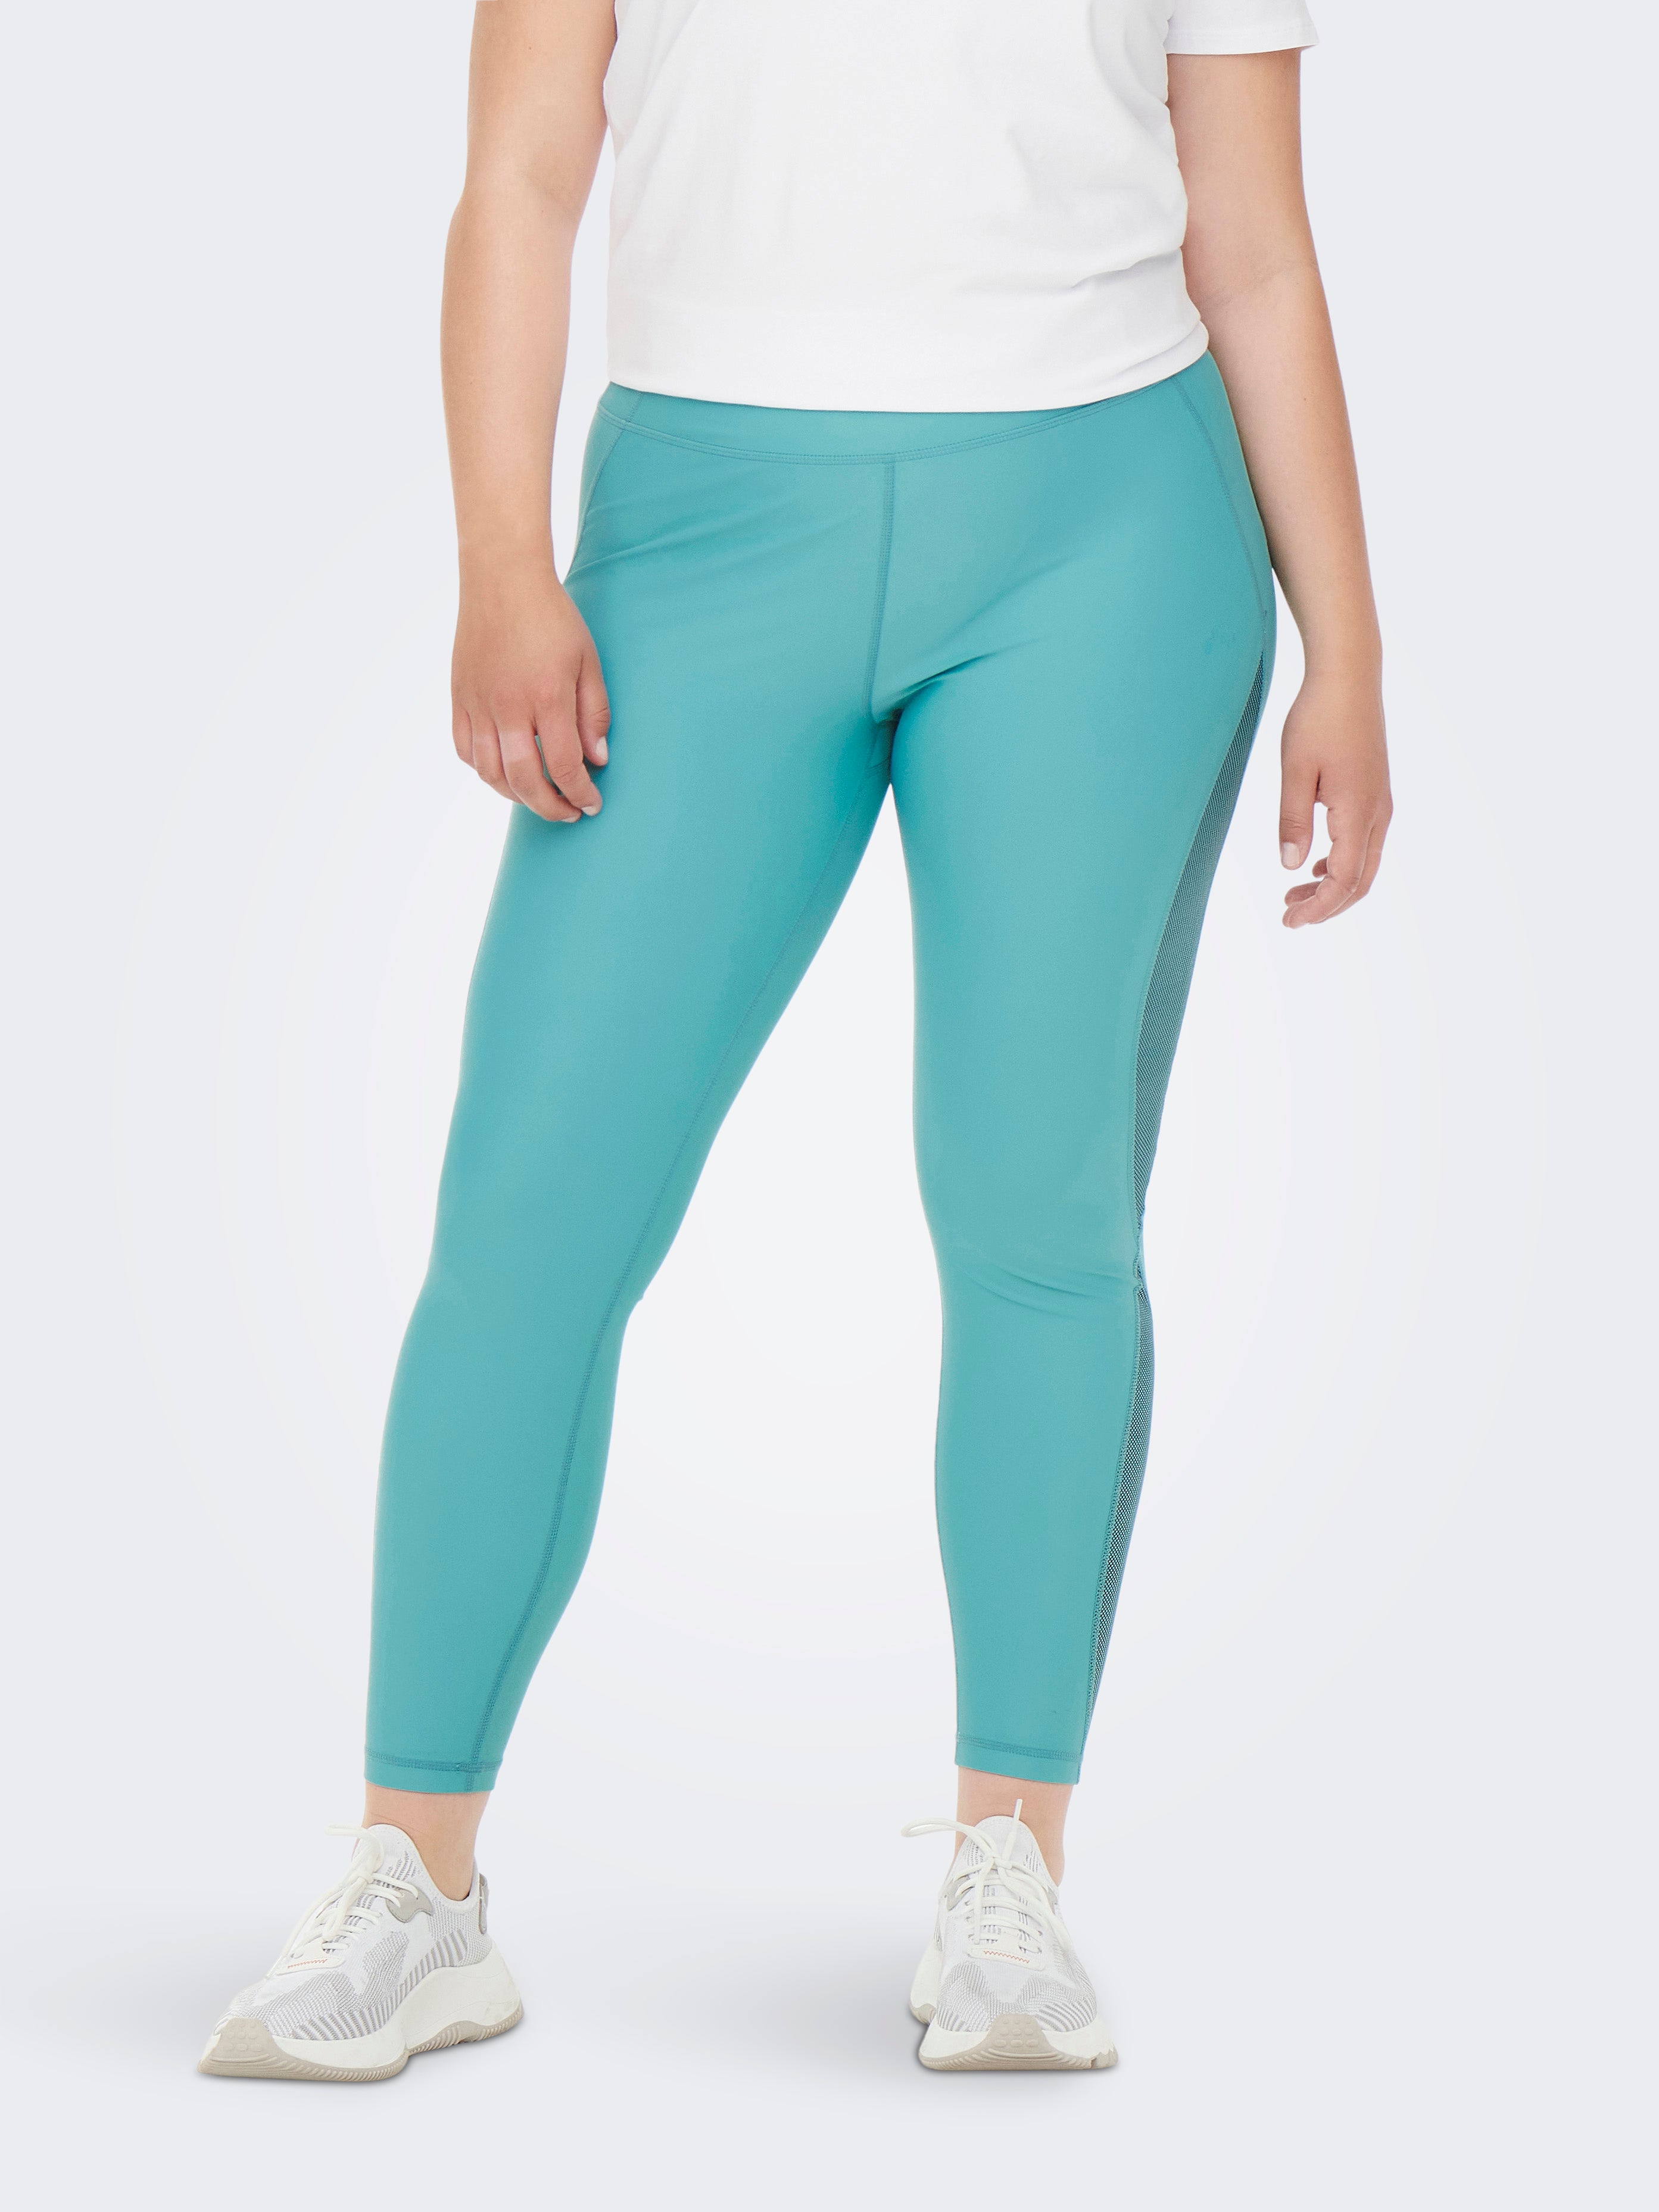 Plus Size Teal Blue Leggings | Yours Clothing